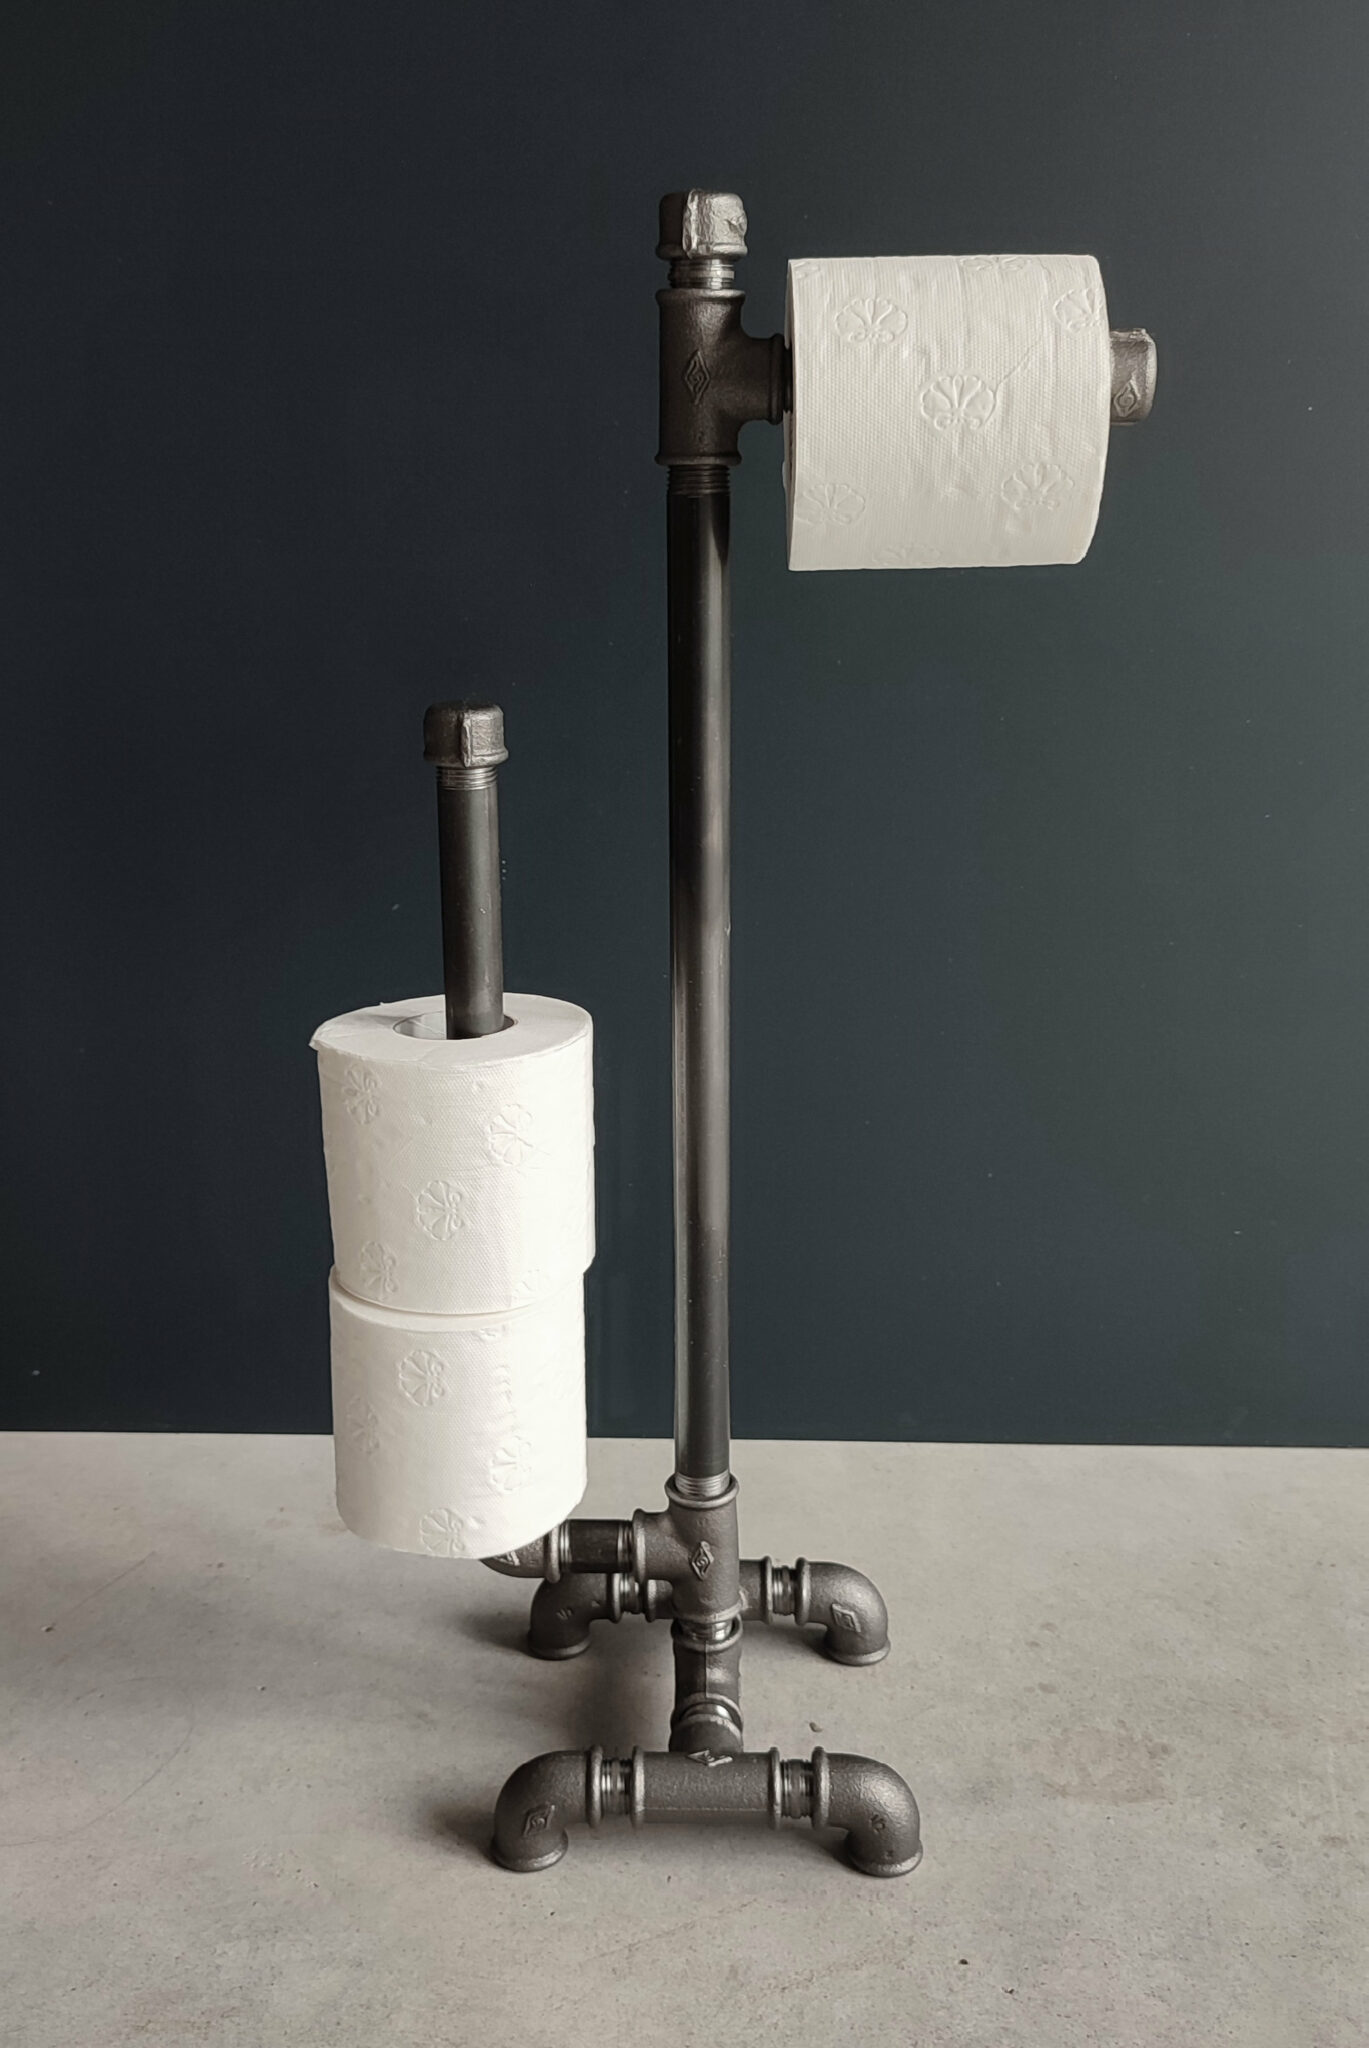 mDesign Metal Toilet Paper Holder Stand and Dispenser, Holds 4 Rolls - Gray